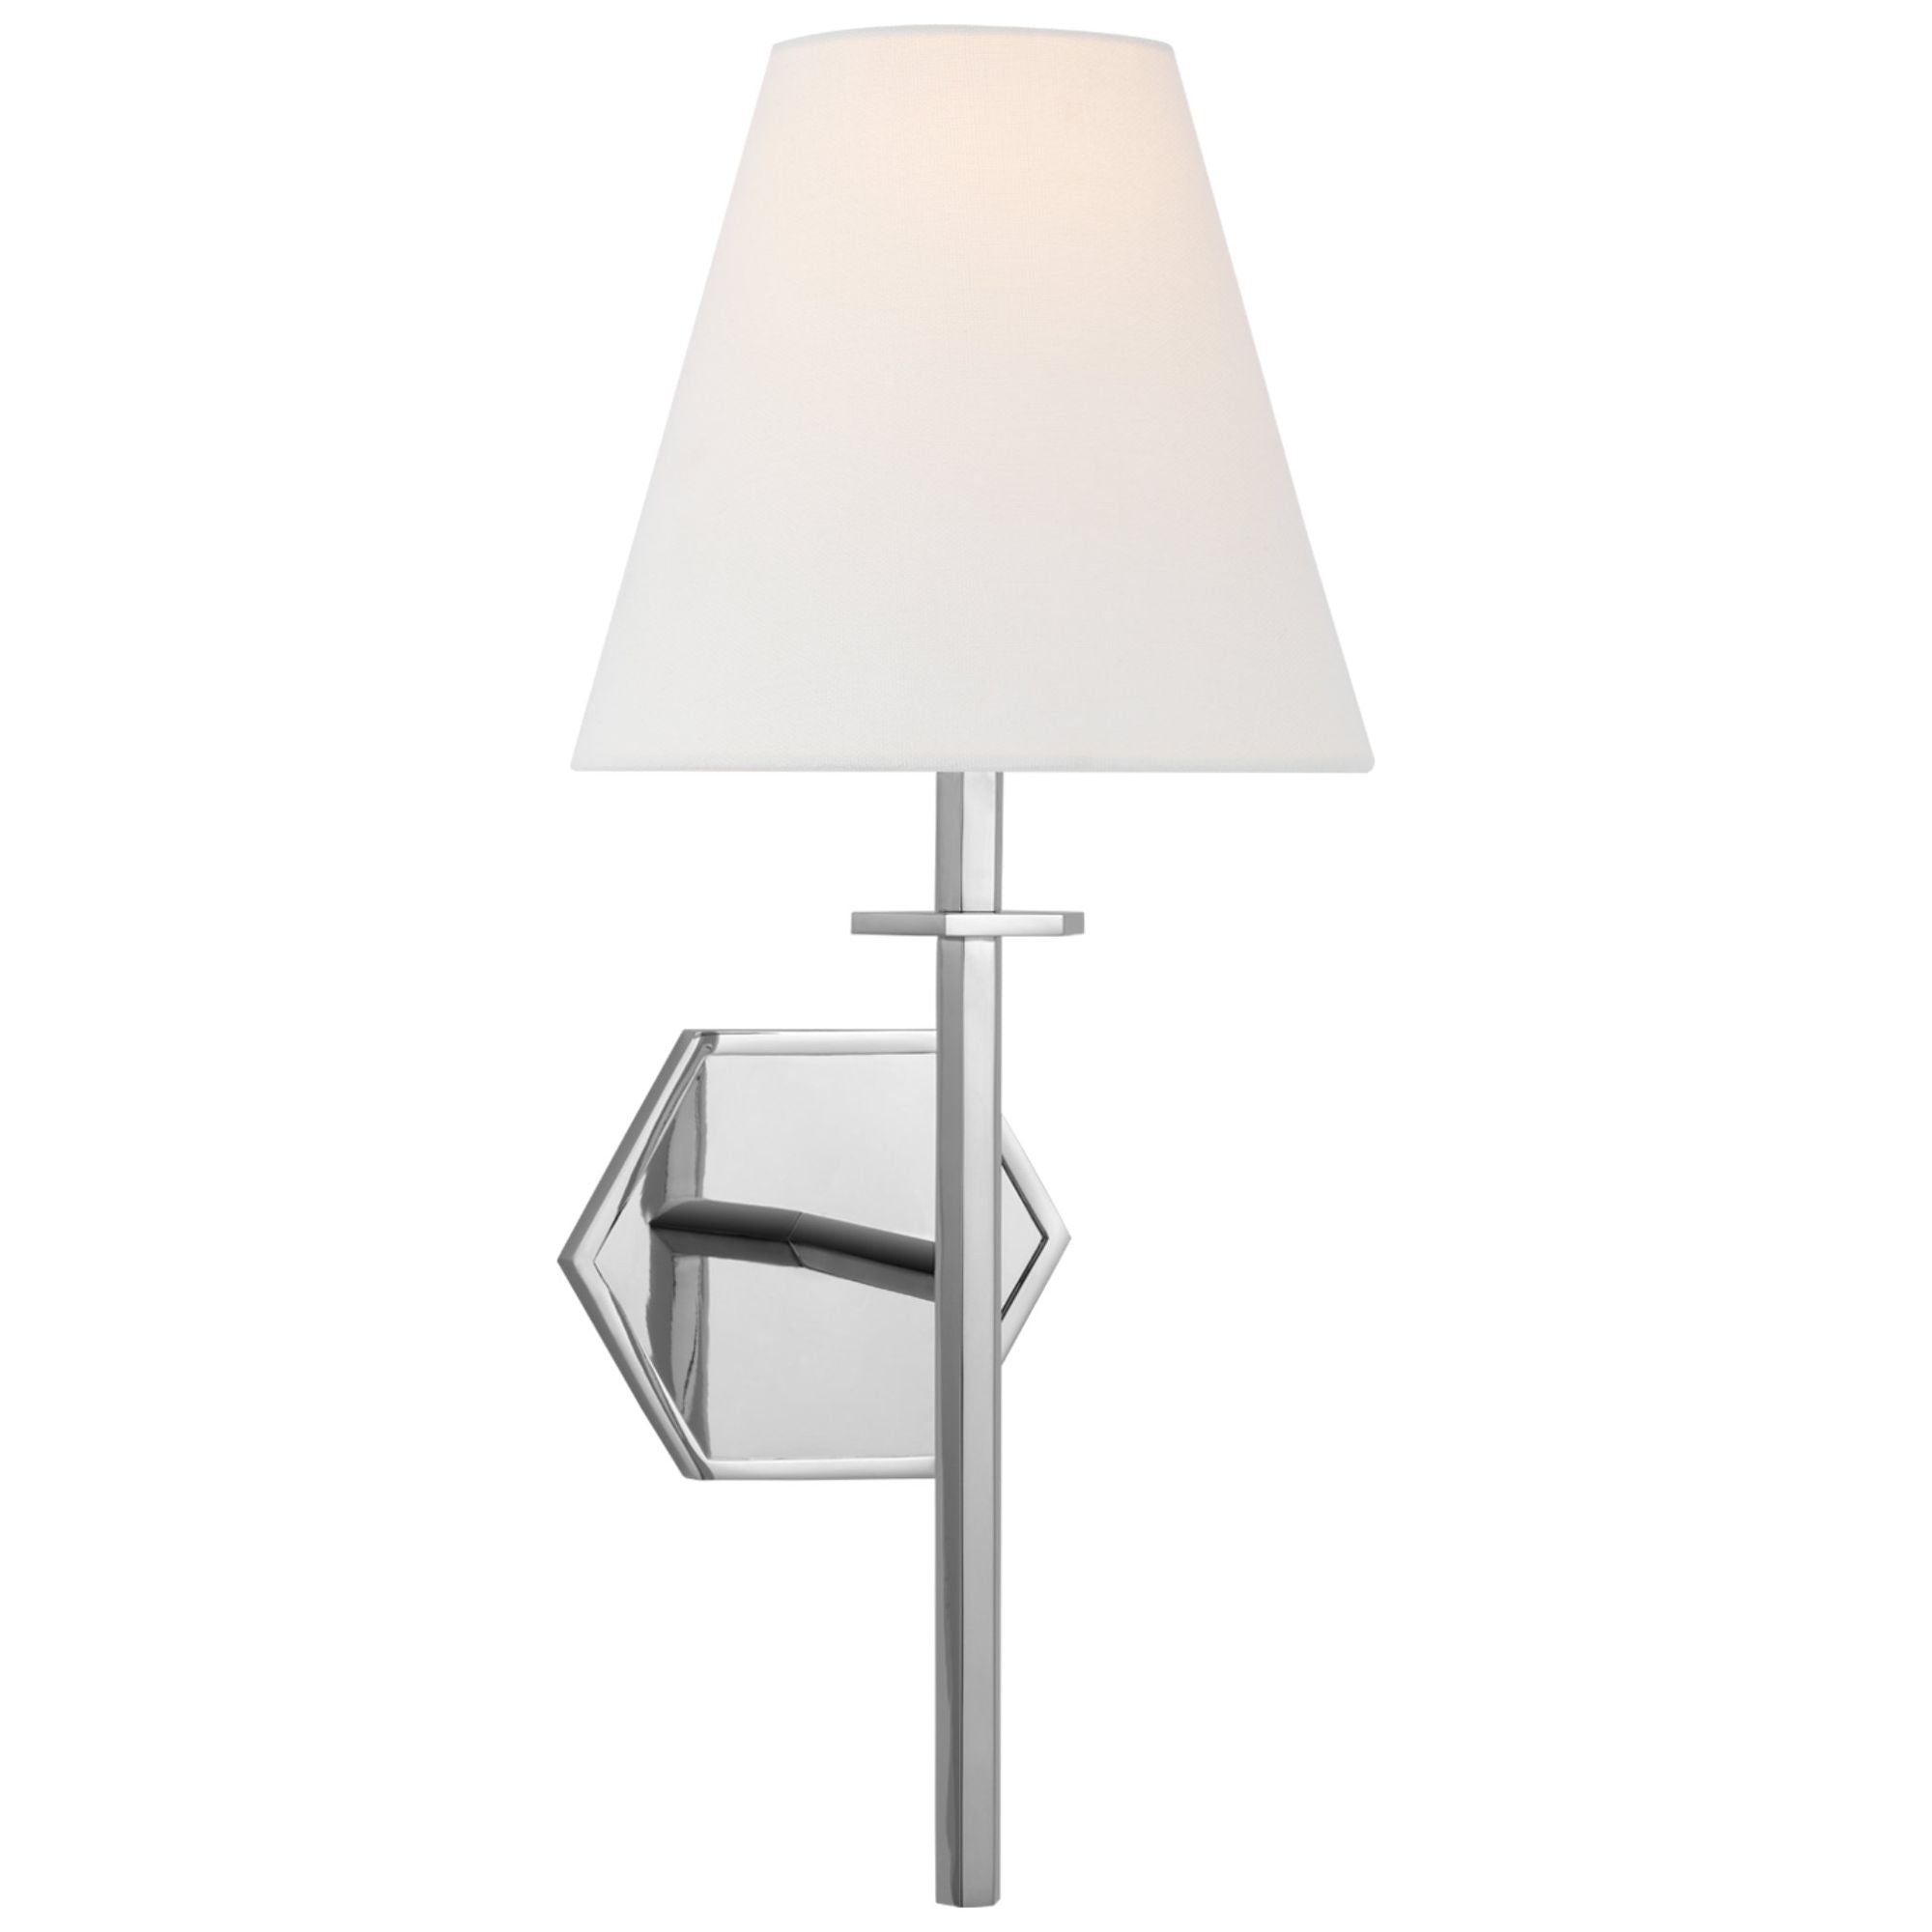 Paloma Contreras Olivier Medium Sconce in Polished Nickel with Linen Shade